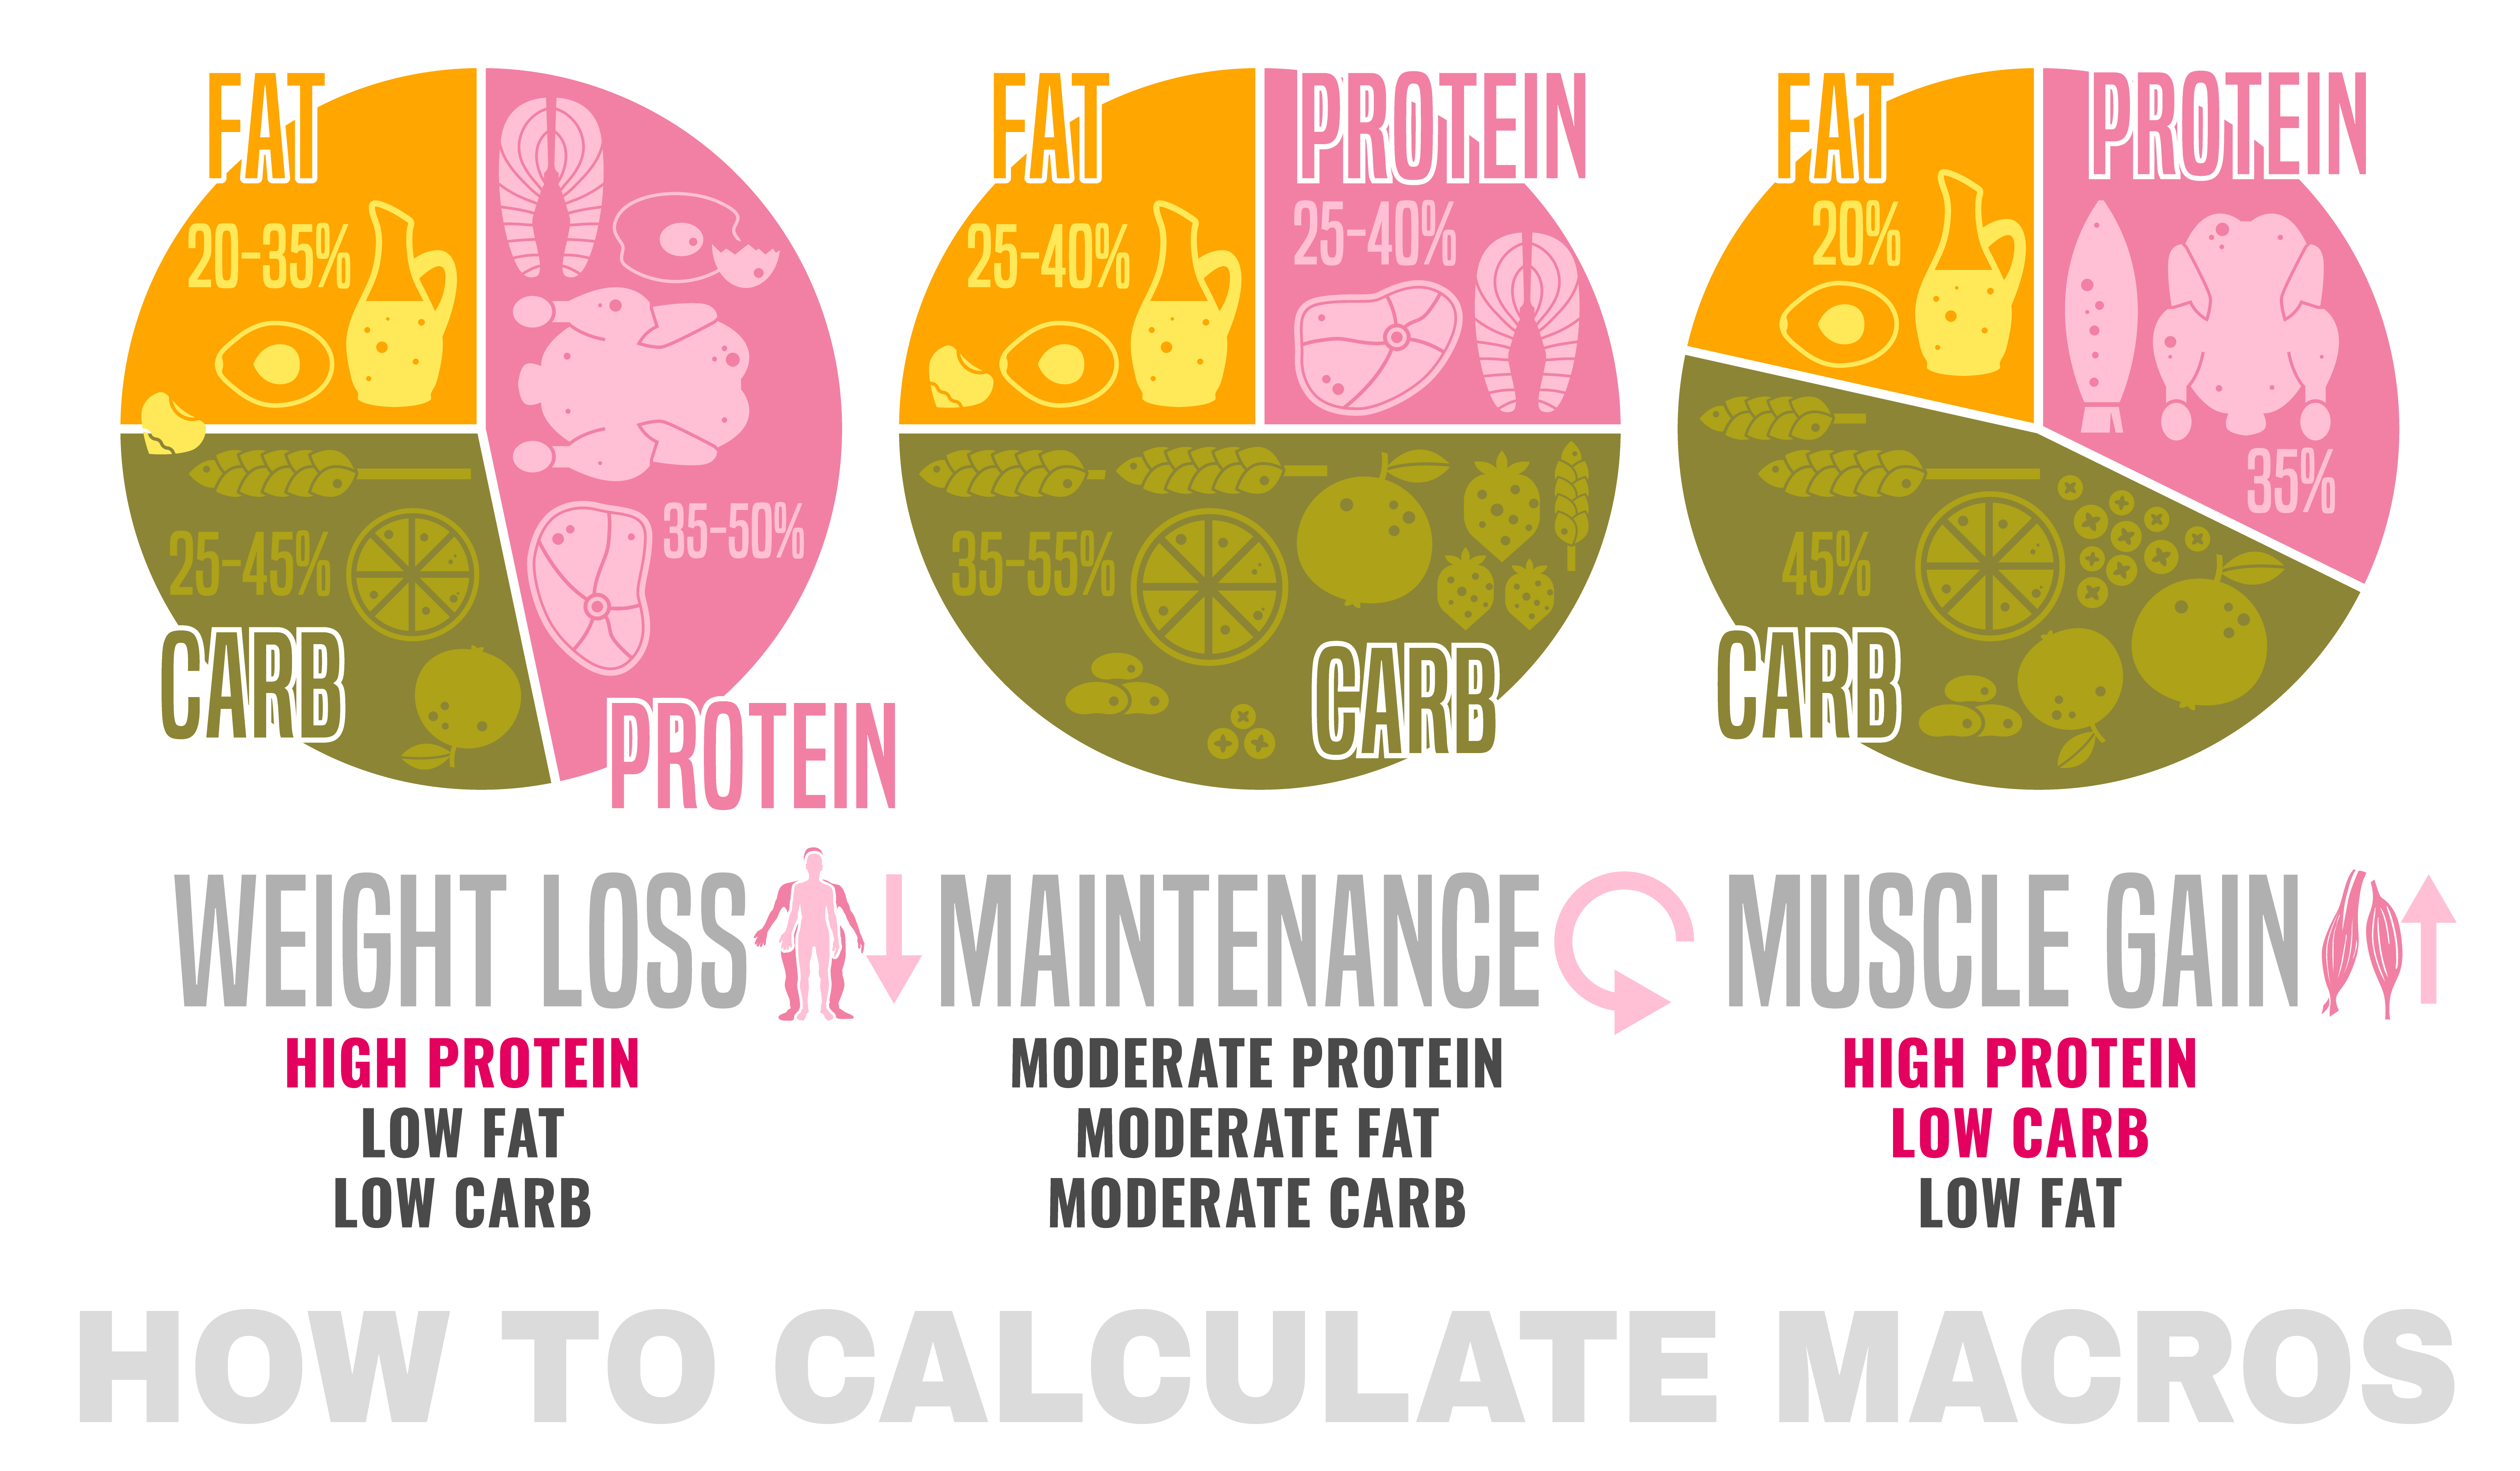 Typical macro set for different types of diets. Typically, we lower carbohydrates content in our diet if we want to lose weight, and we increase its content if we want to put on some muscles